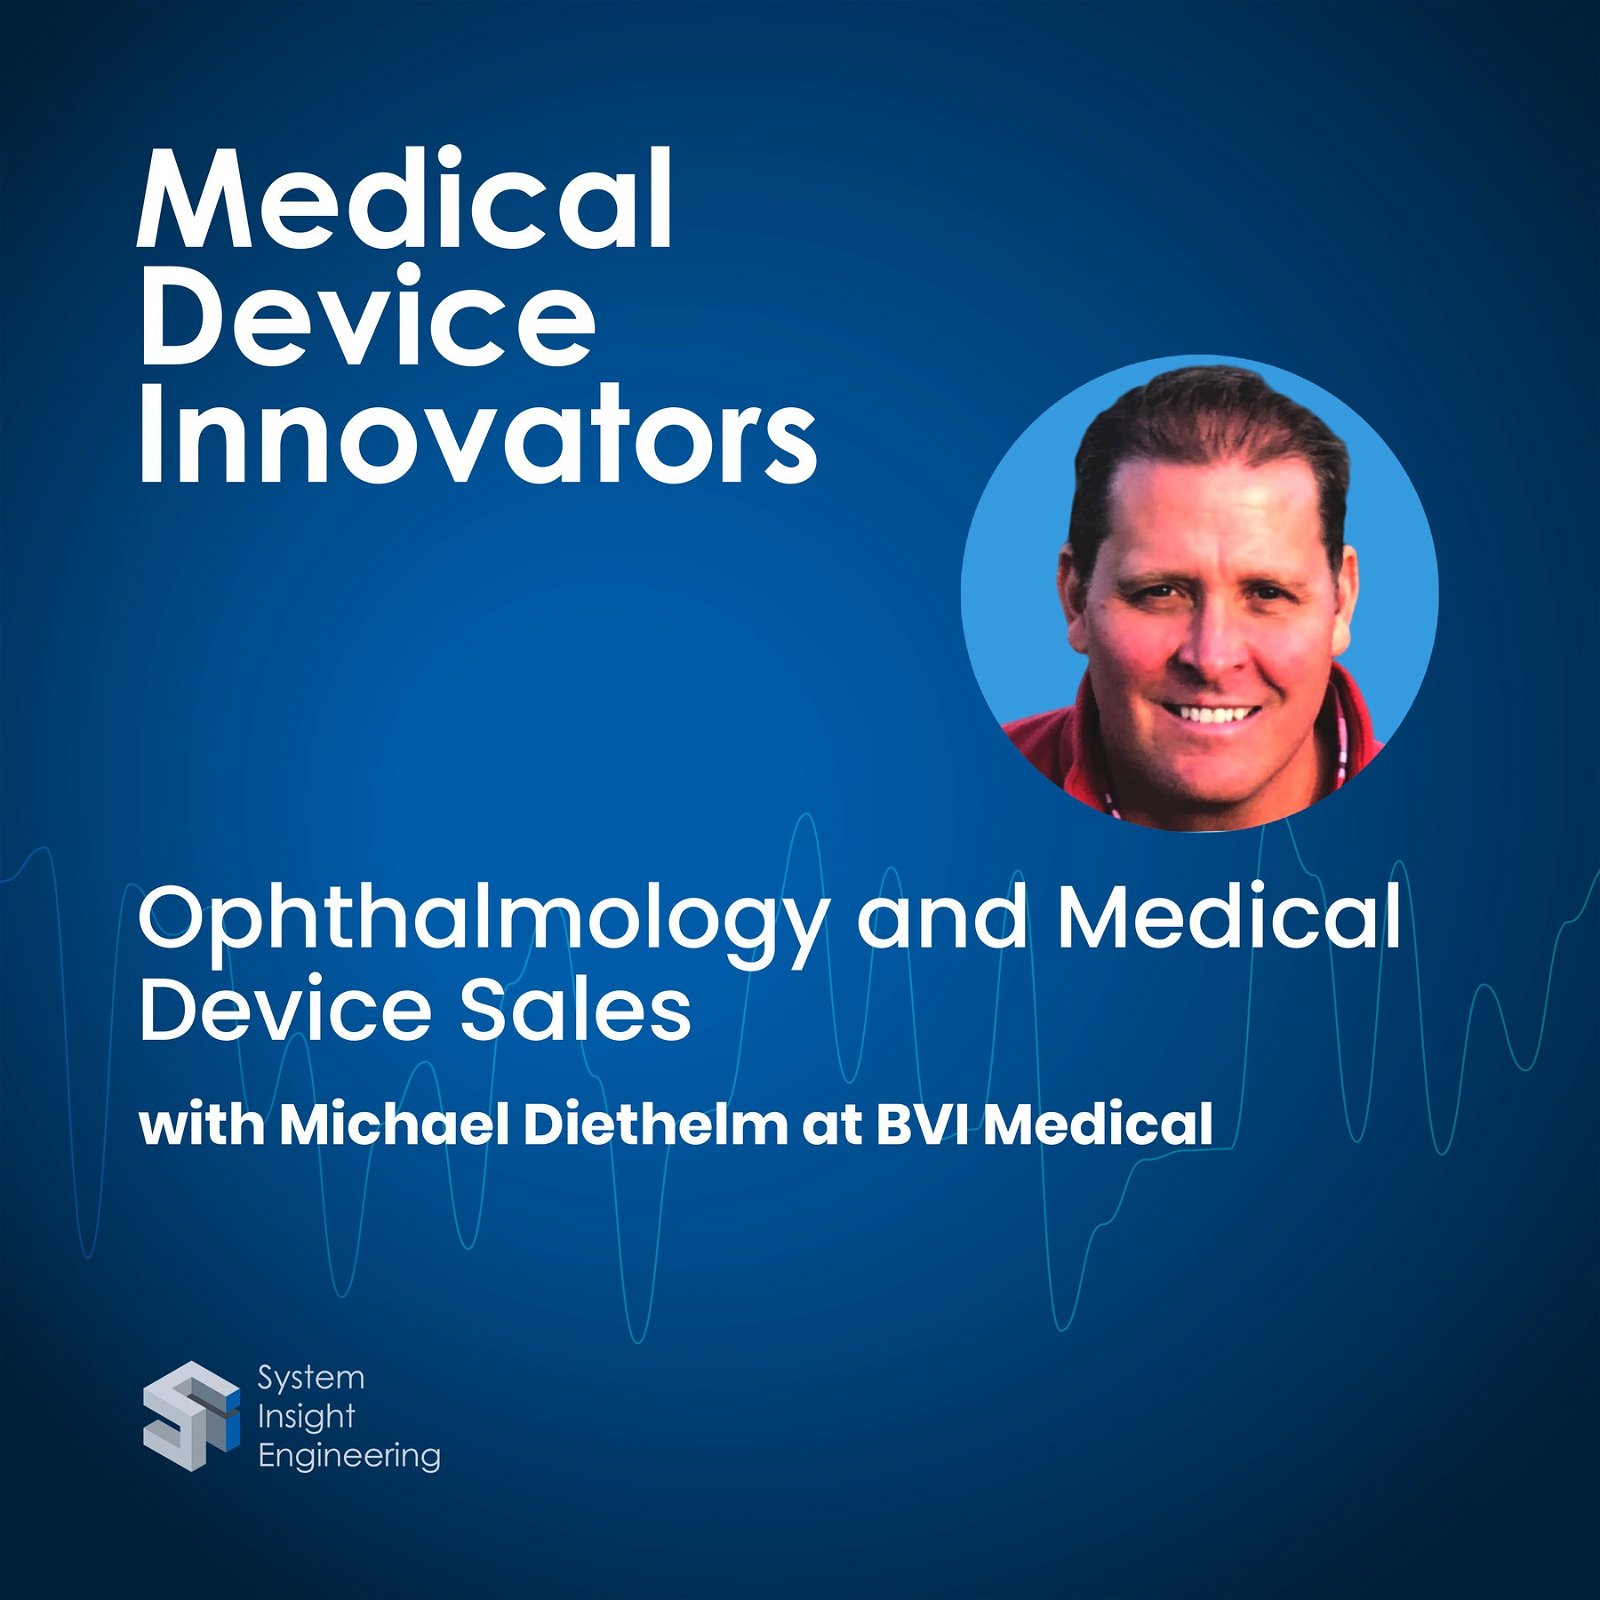 Ophthalmology and Medical Device Sales with Michael Diethelm at BVI Medical